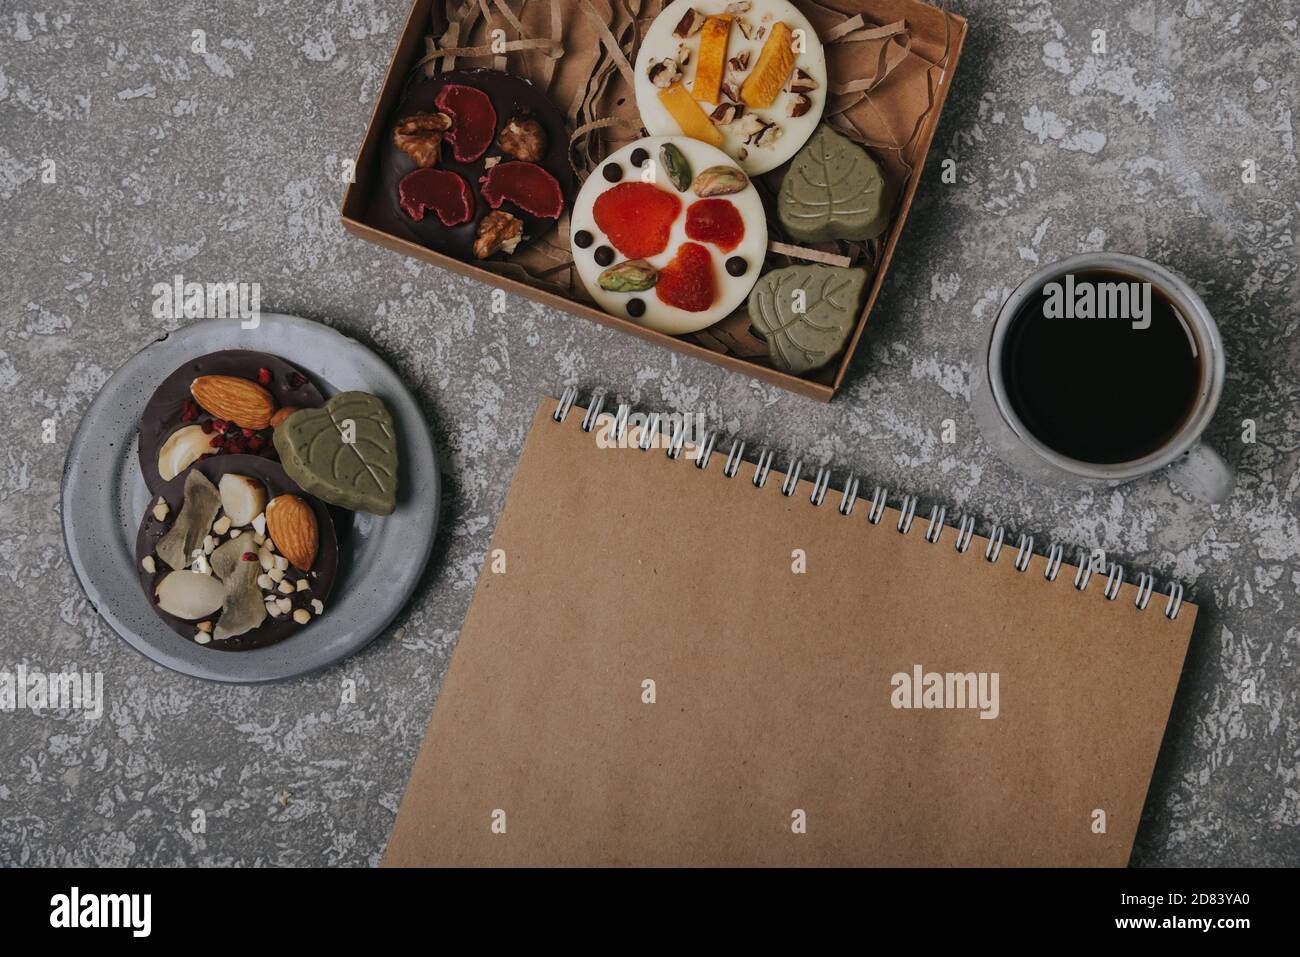 Chocolates with dried fruits in a box and craft paper notebook near the cup of coffee. Place for your text. Stock Photo